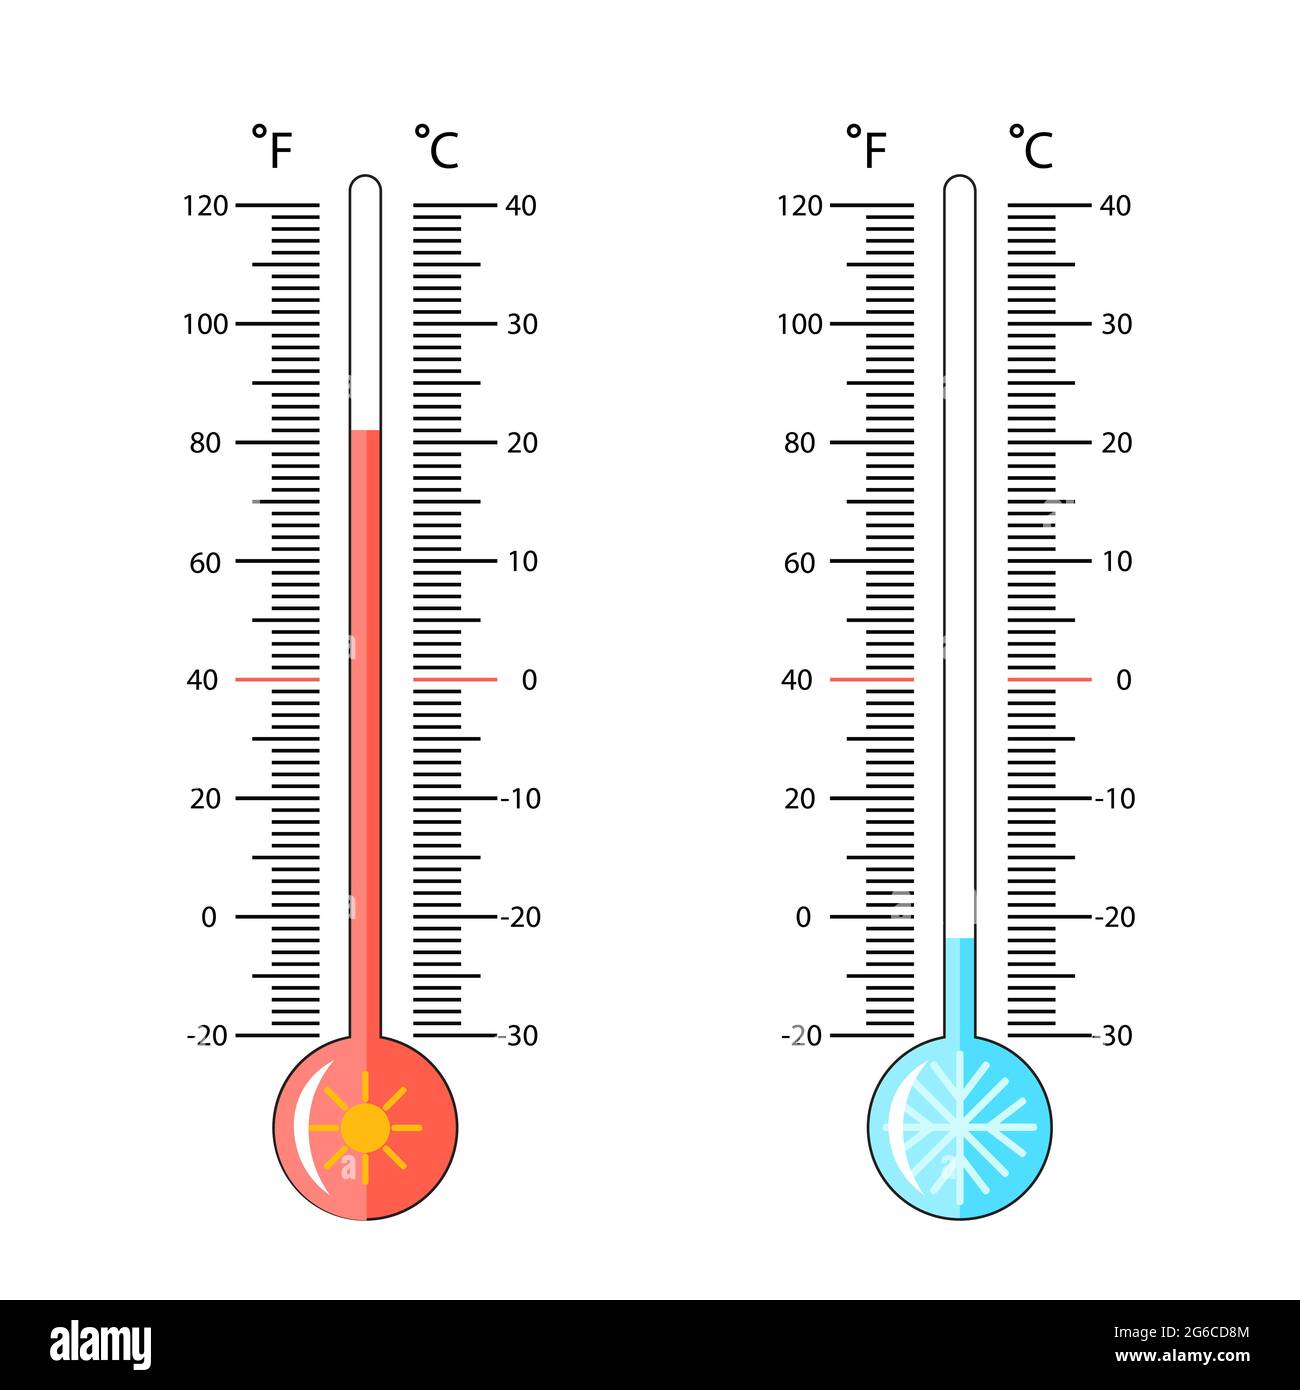 https://c8.alamy.com/comp/2G6CD8M/vector-illustration-of-celsius-and-fahrenheit-meteorology-thermometers-measuring-heat-and-cold-on-white-background-2G6CD8M.jpg